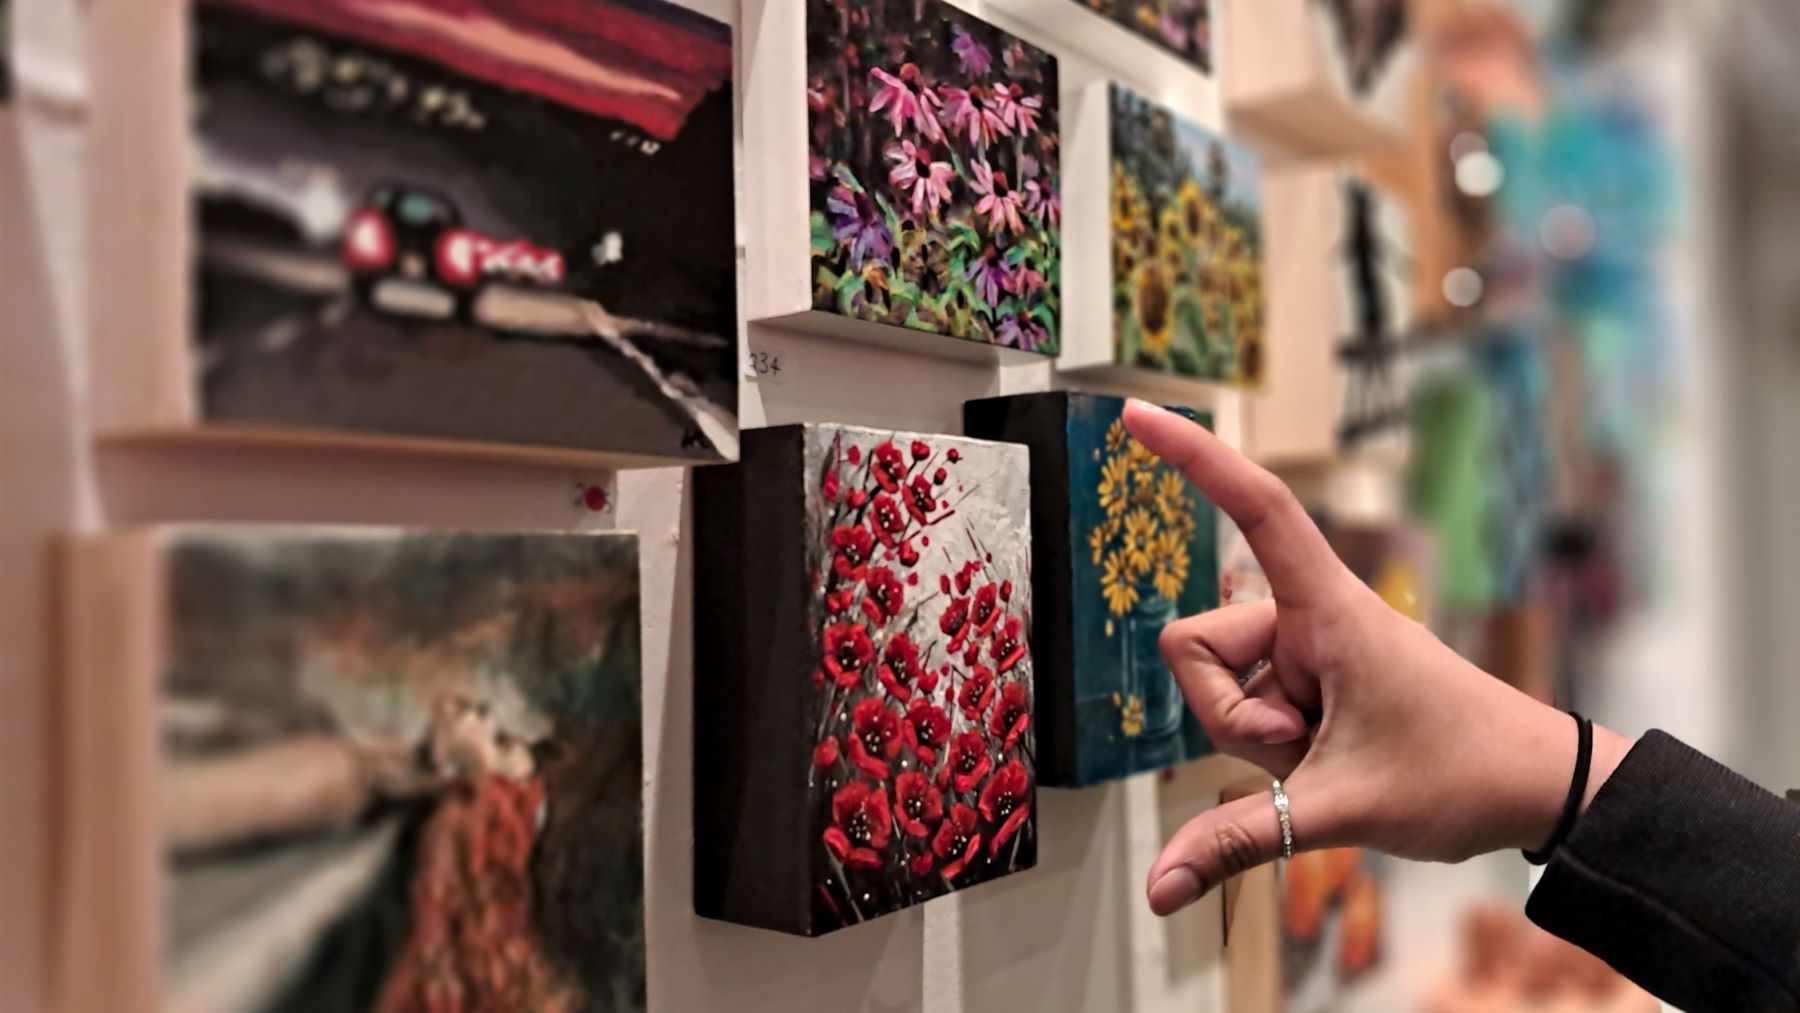 A person spreads their thumb and index finger in front of a painting of red flowers.